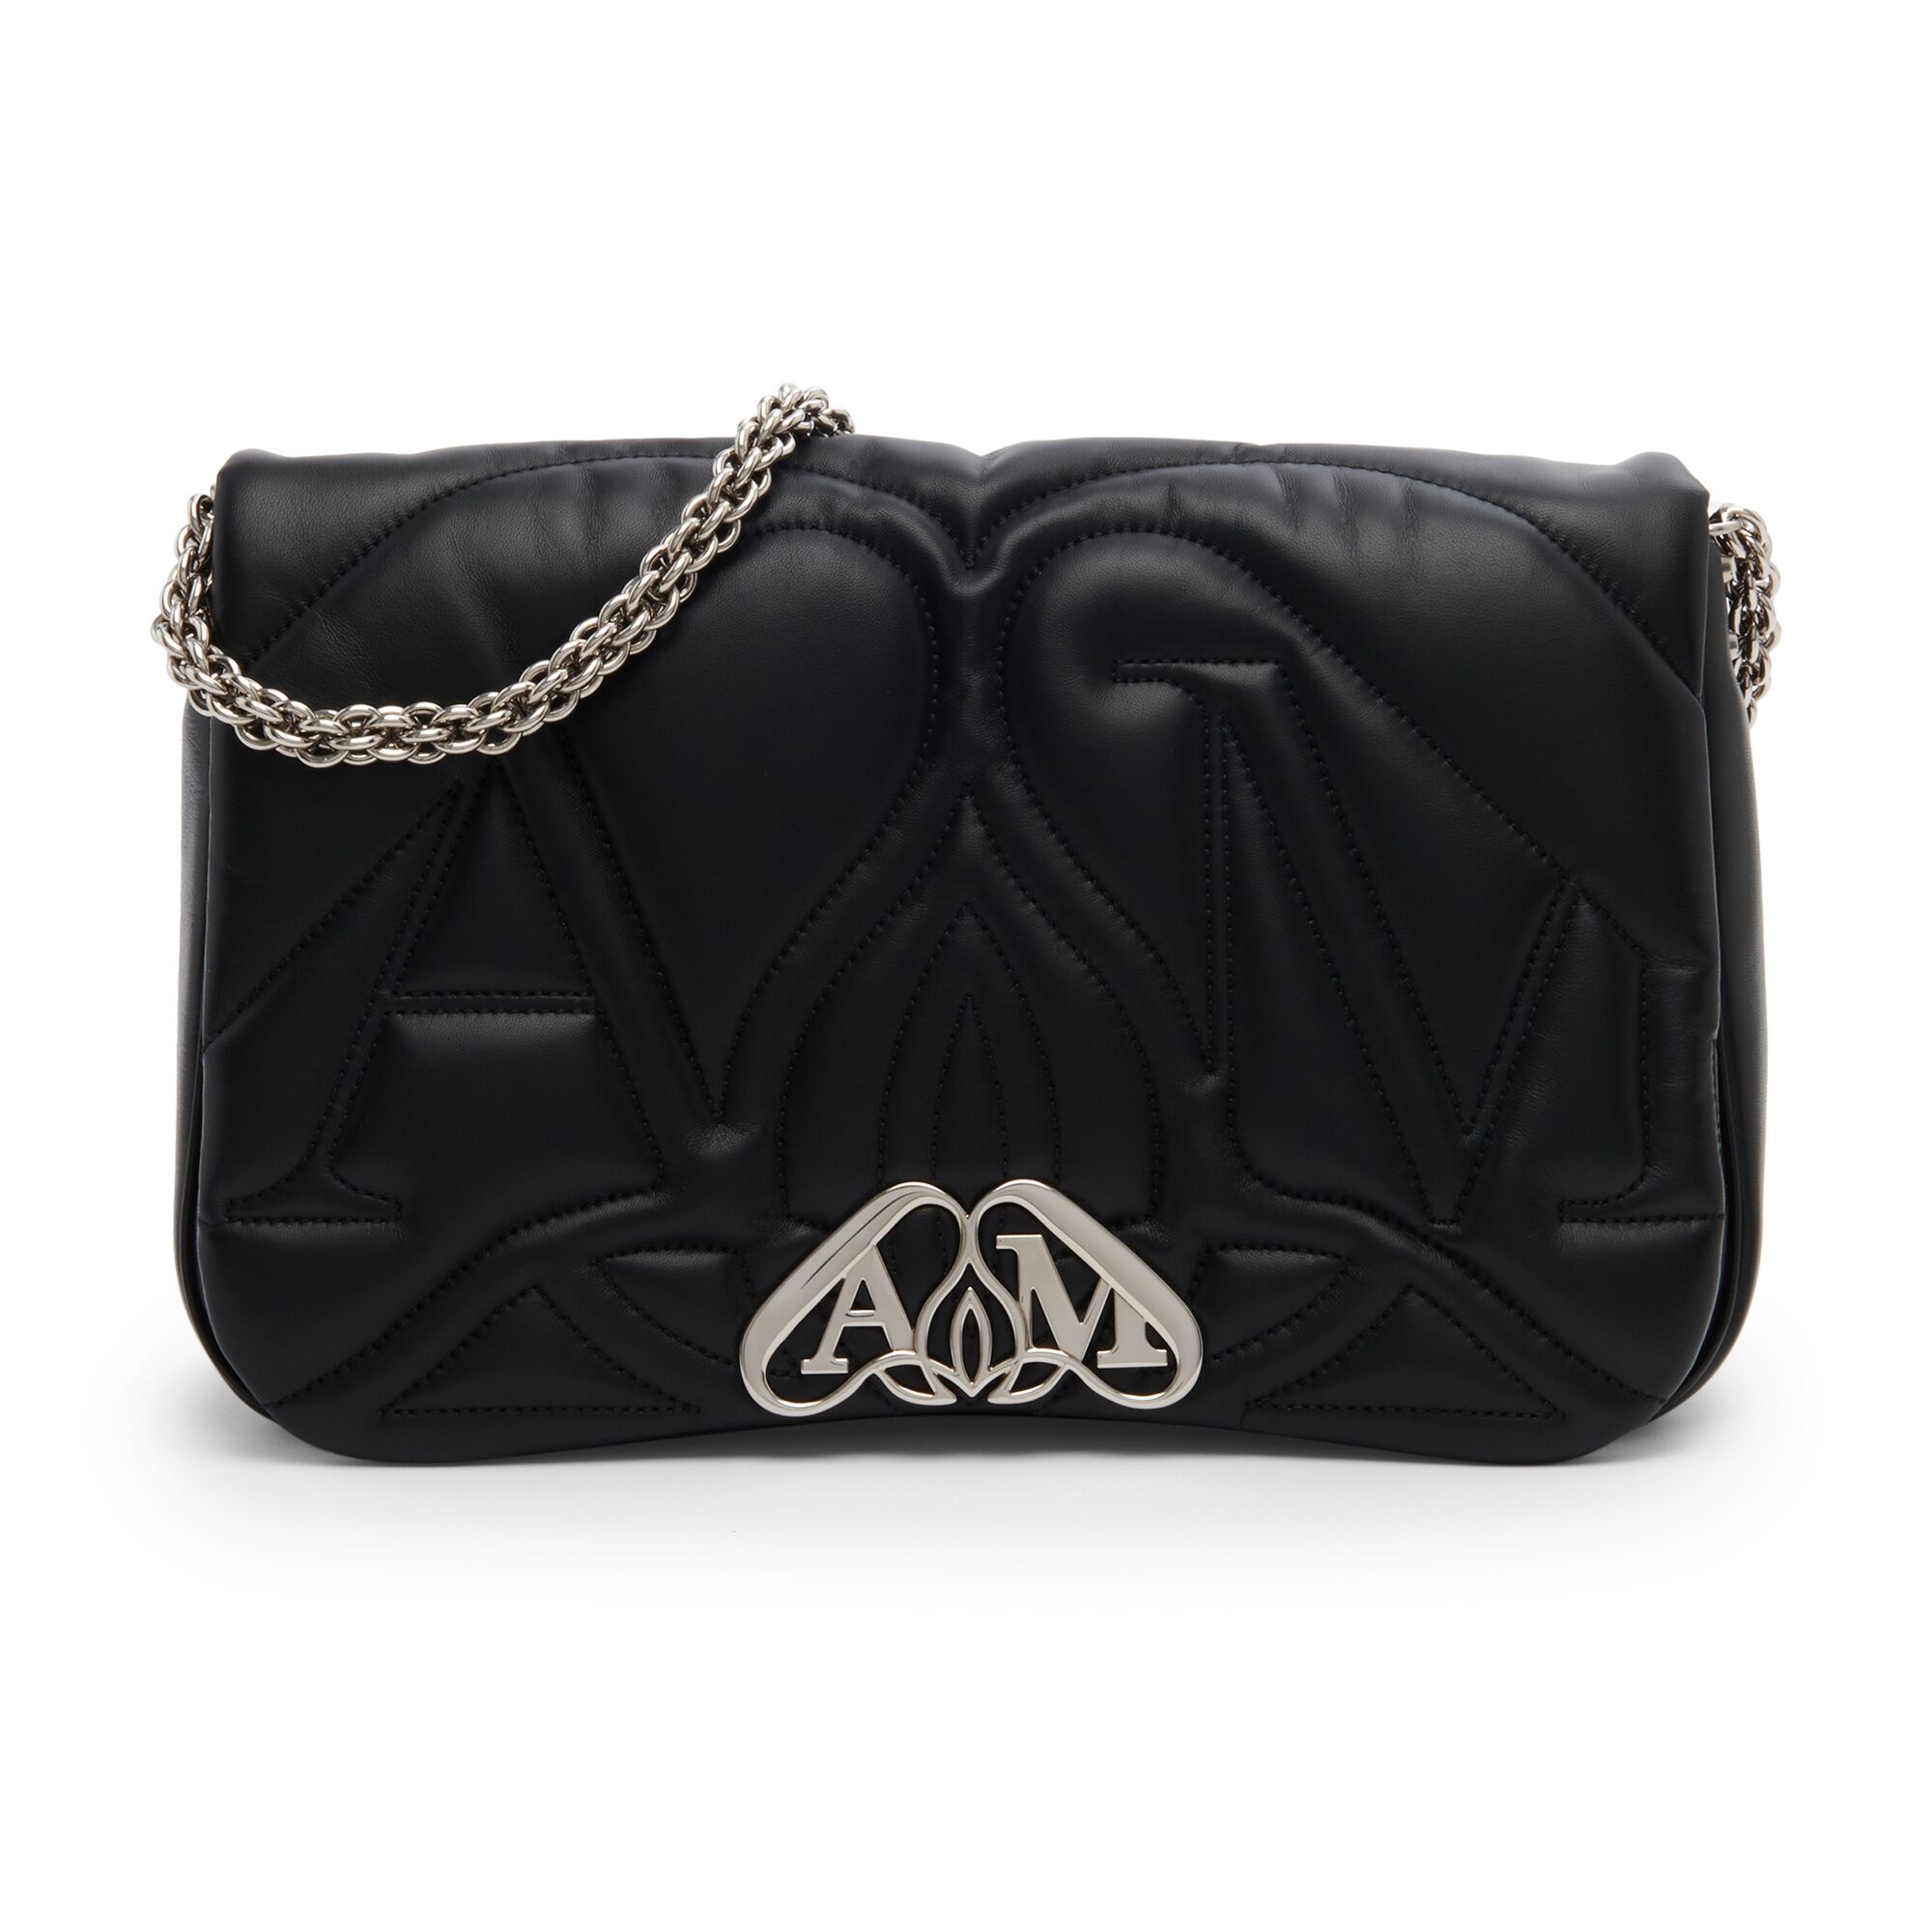 Image Magazine Issue 18 Mission Coveted. Alexander McQueen Seal leather shoulder bag